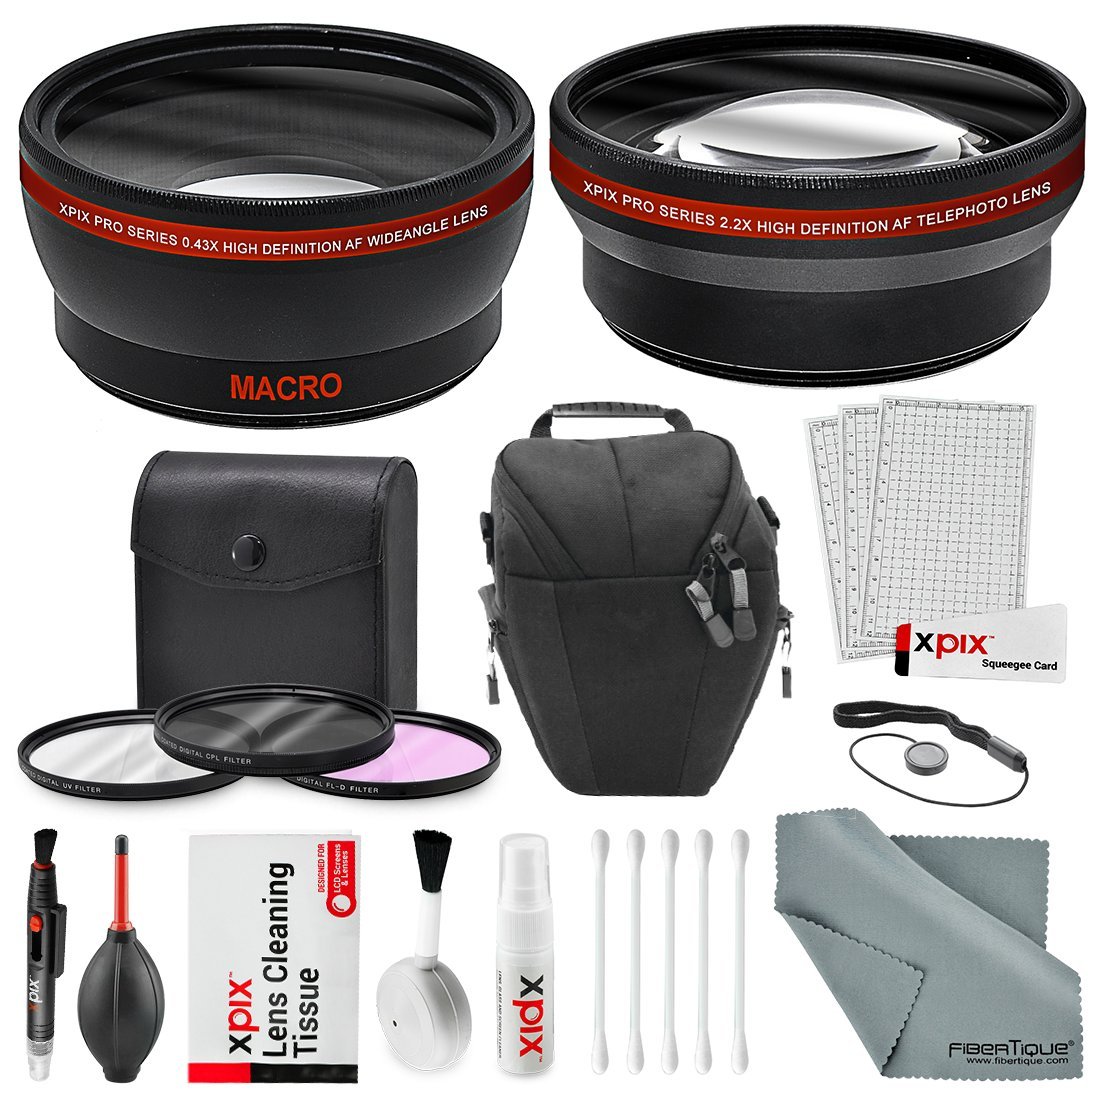 Picture of Xpix XPIX-BASIC-ACCESSORY-KIT308-NFBA 58 mm HD 2.2x Telephoto & 0.43x Wide Angle Lens with & Travel Bag for Canon Rebel